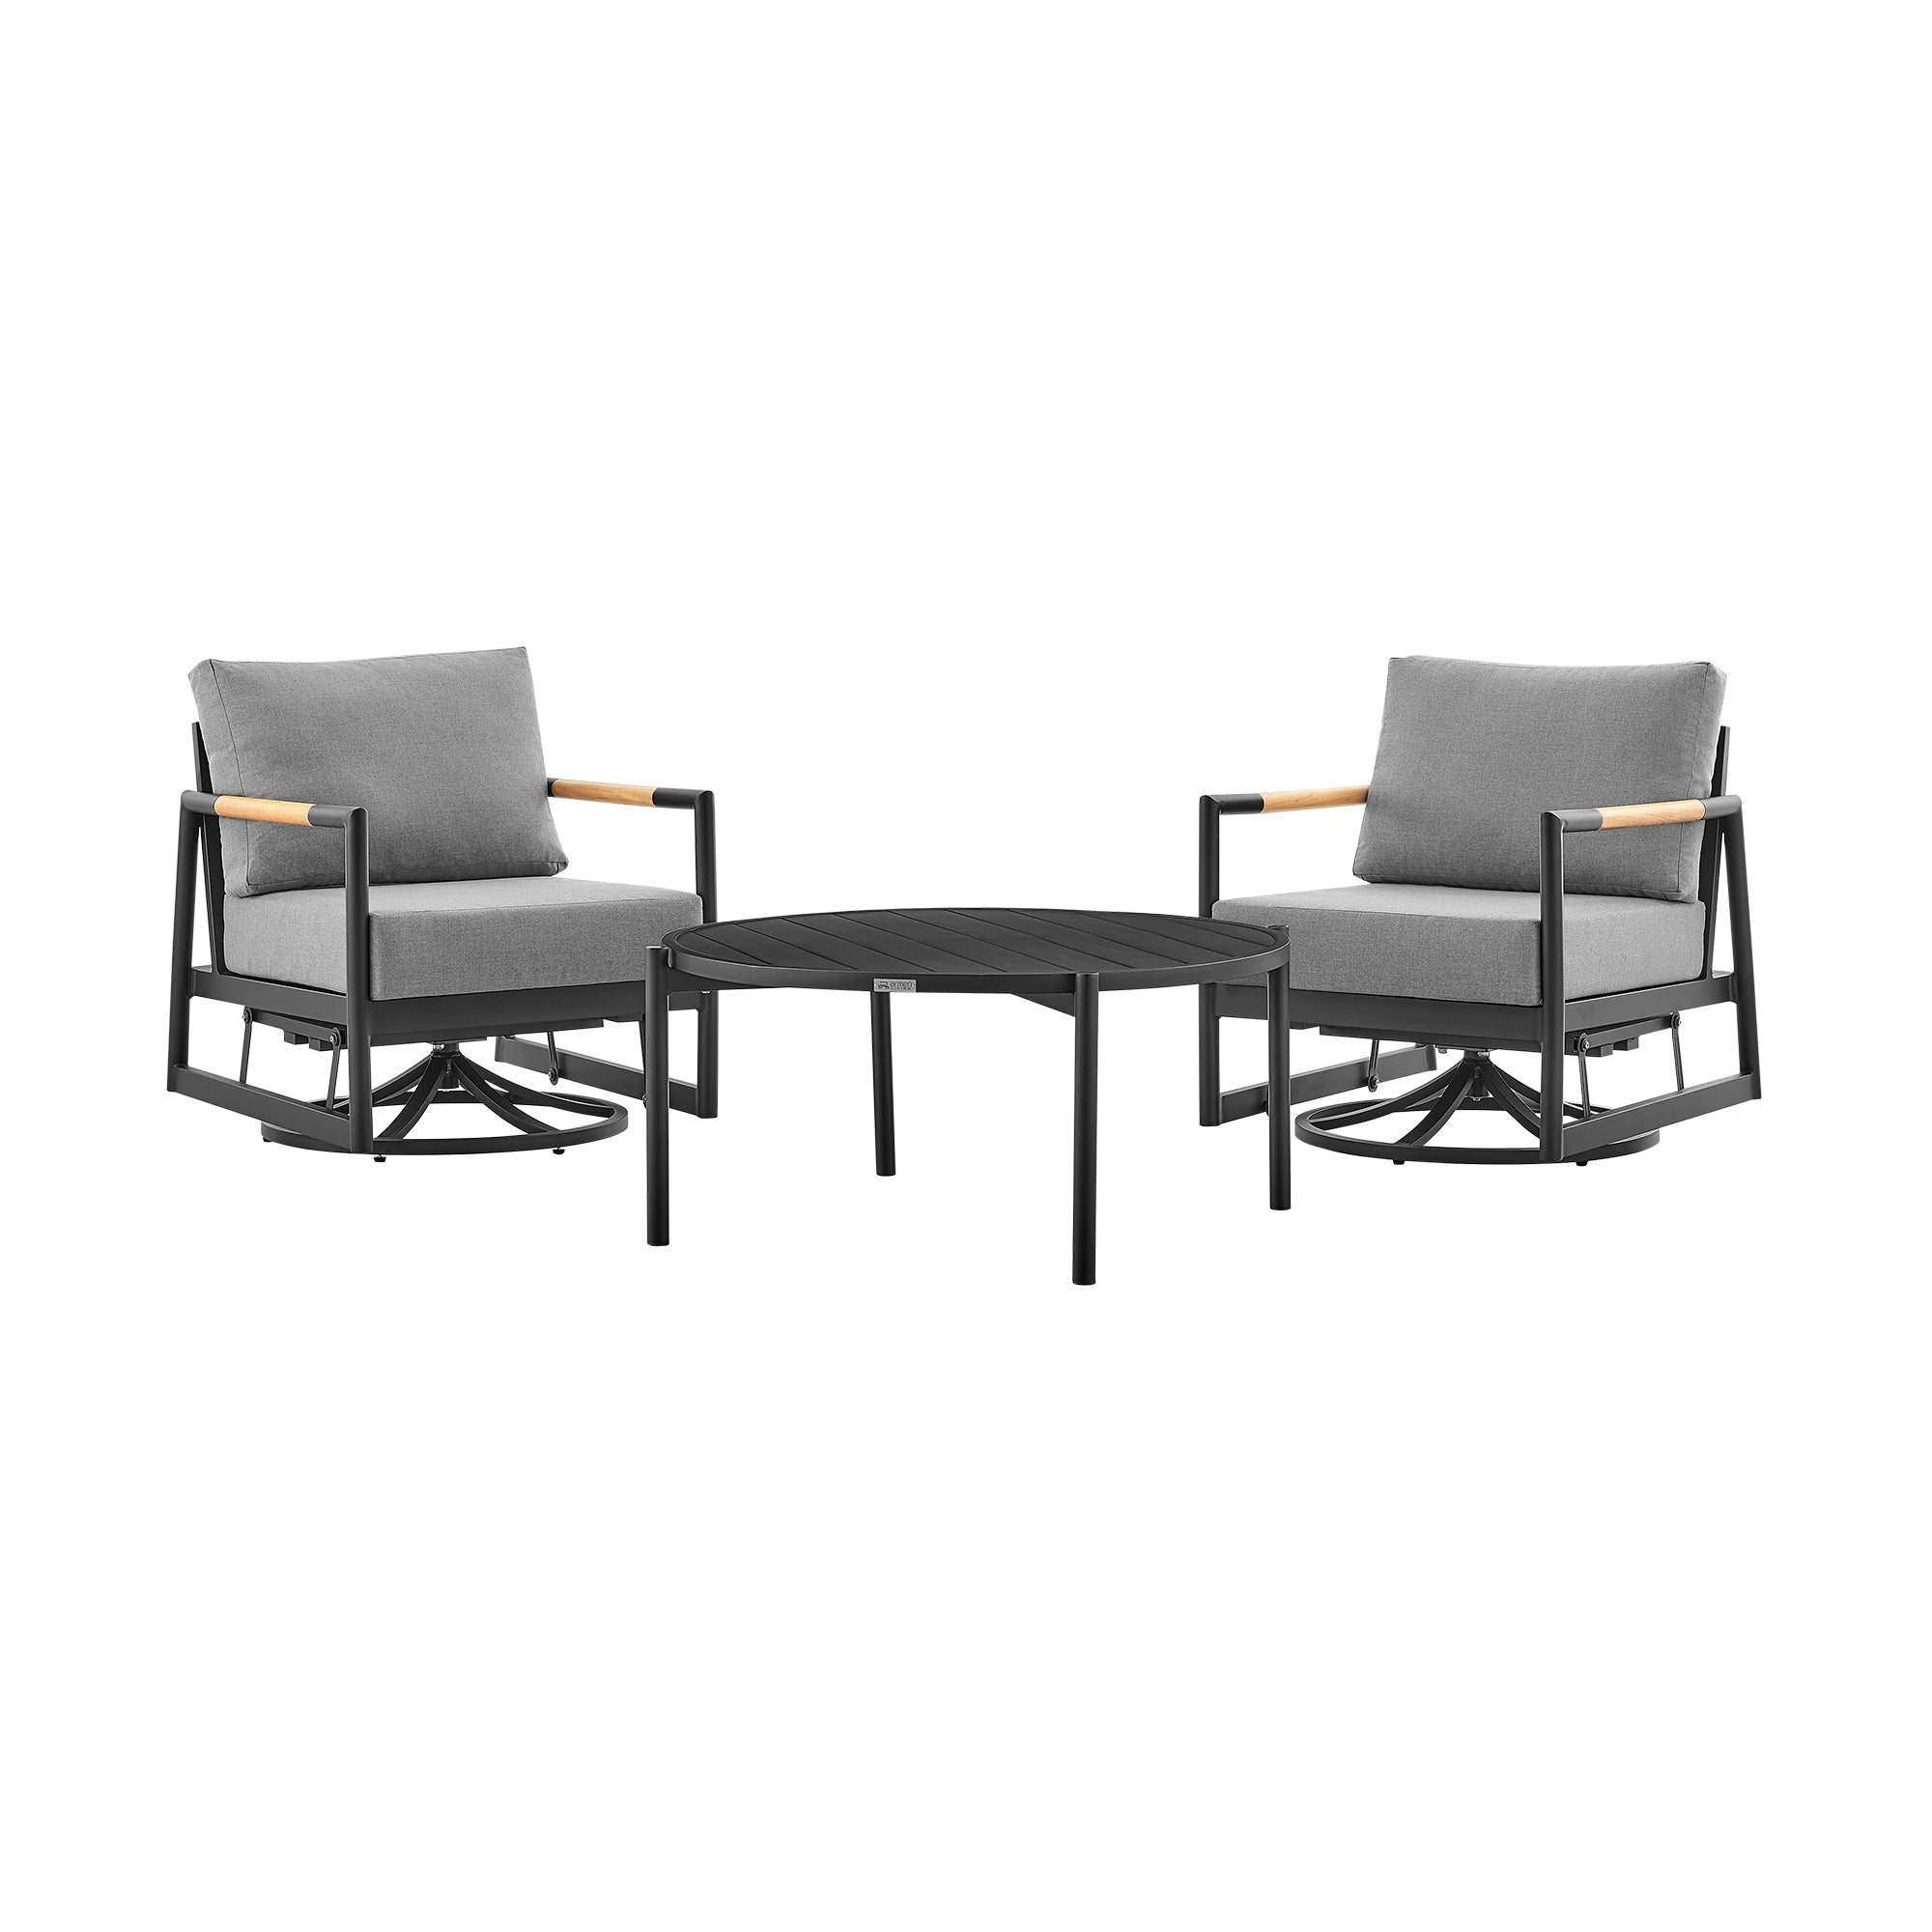 Armen Living - Royal and Tiffany 3 Piece Outdoor Patio Swivel Seating Set in Black Aluminum with Teak Wood and Grey Cushions - 840254332614